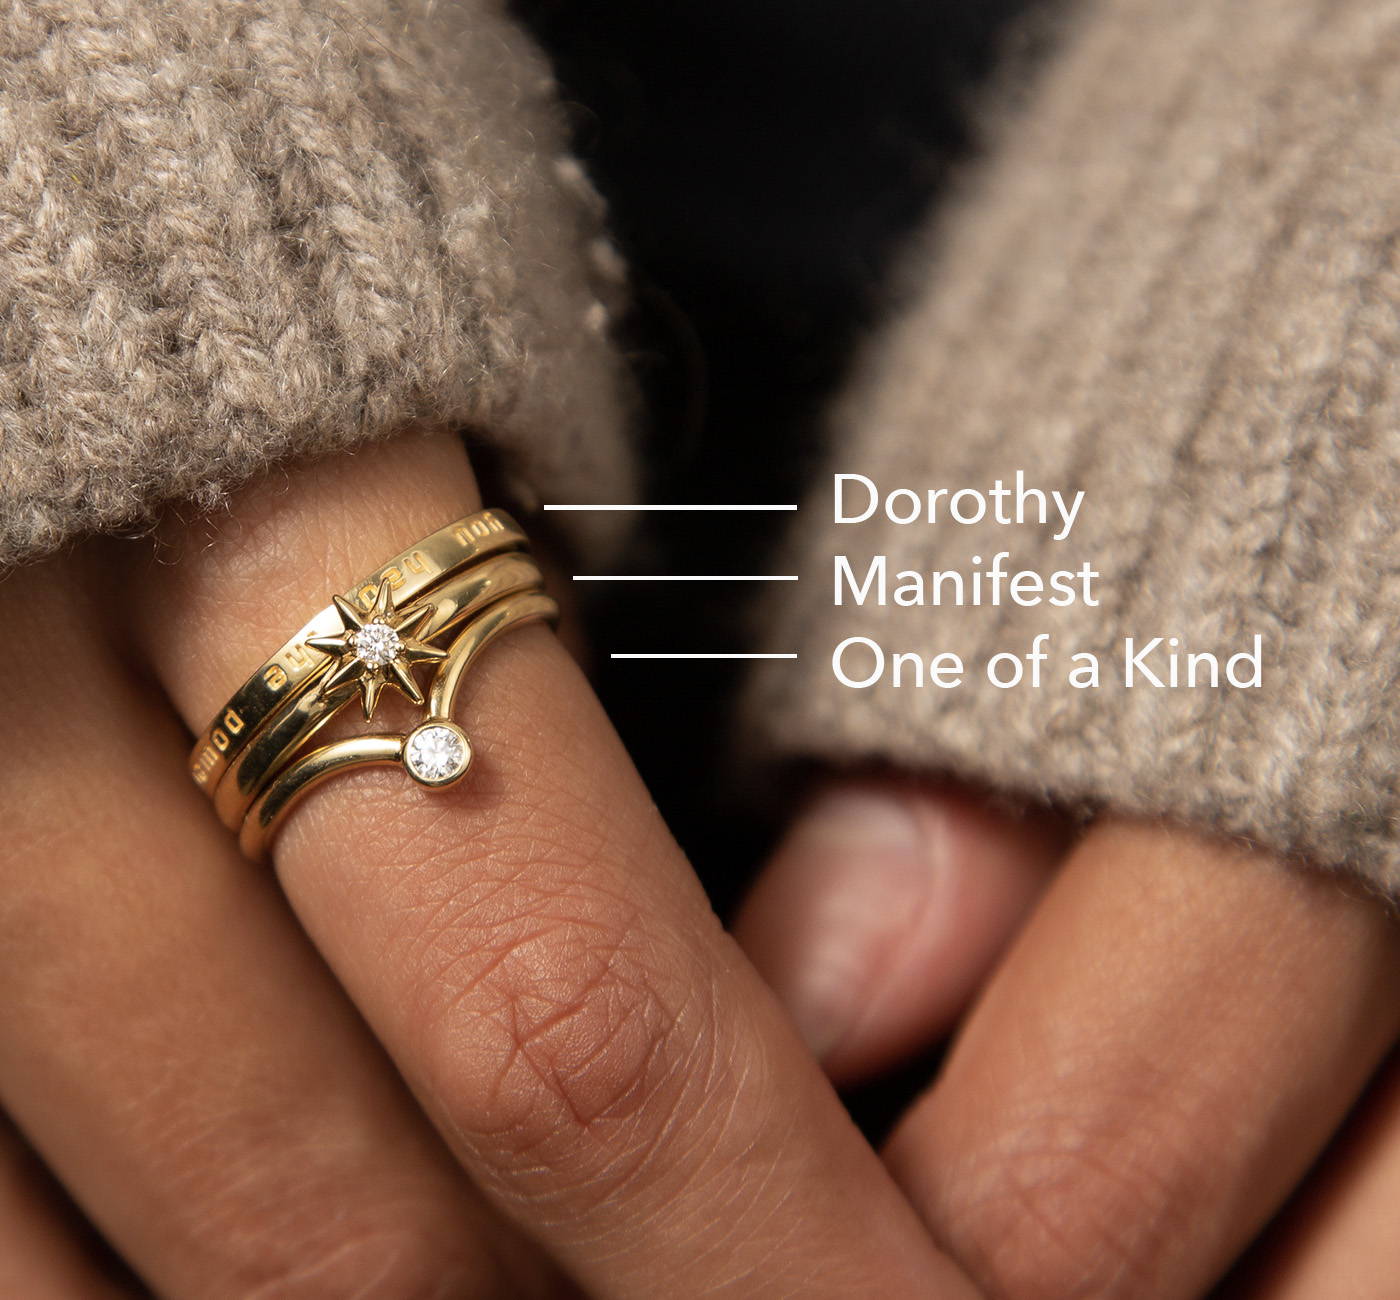 Poesy Stackable Rings